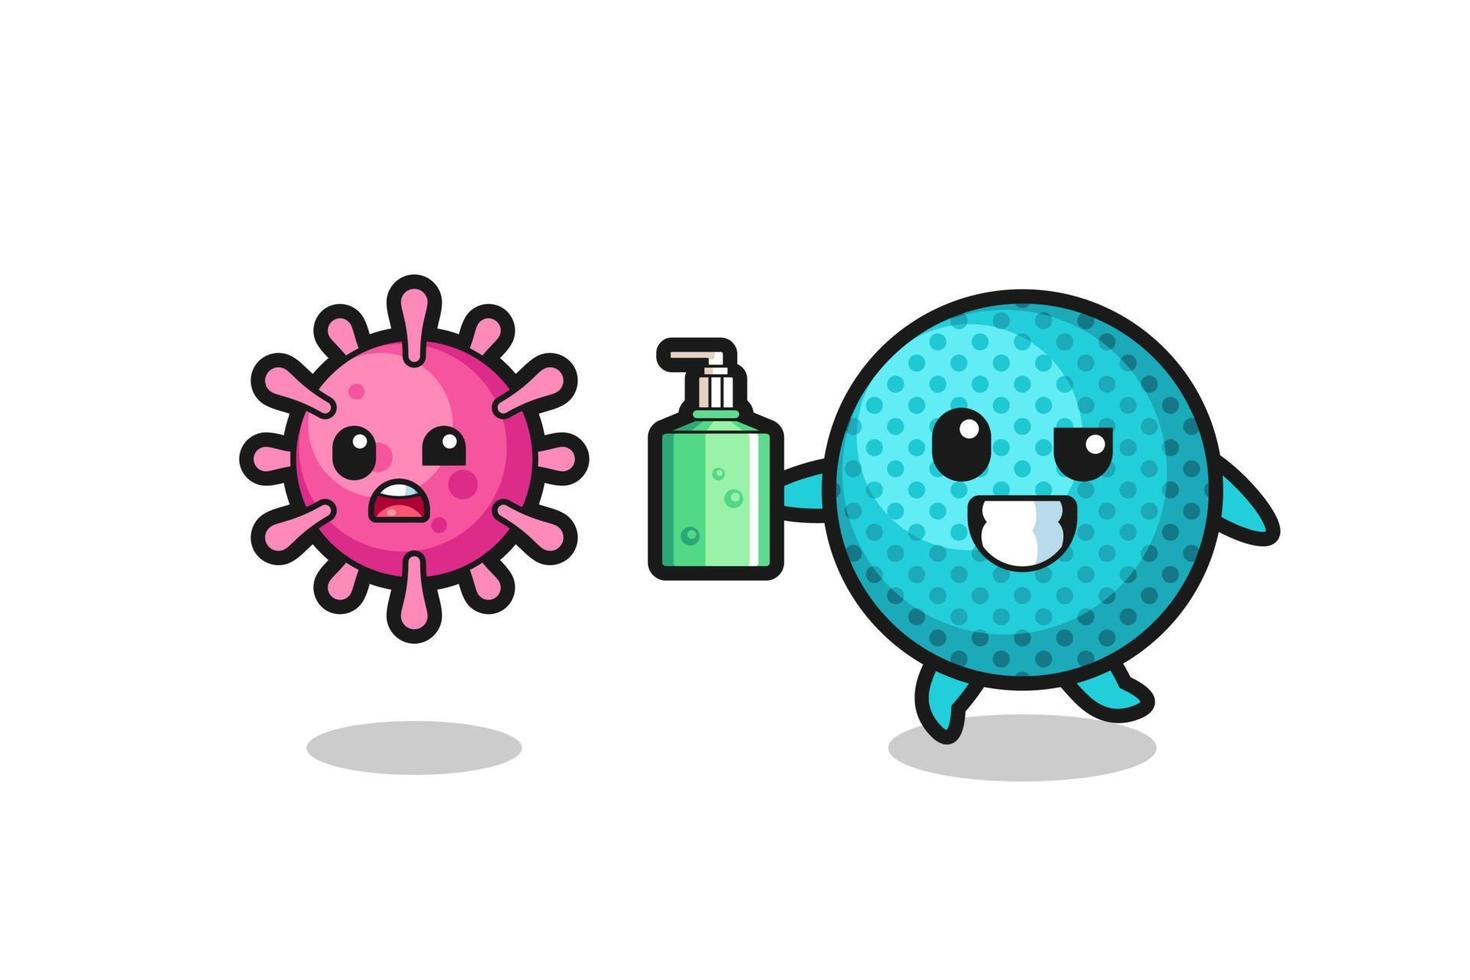 illustration of spiky ball character chasing evil virus with hand sanitizer vector